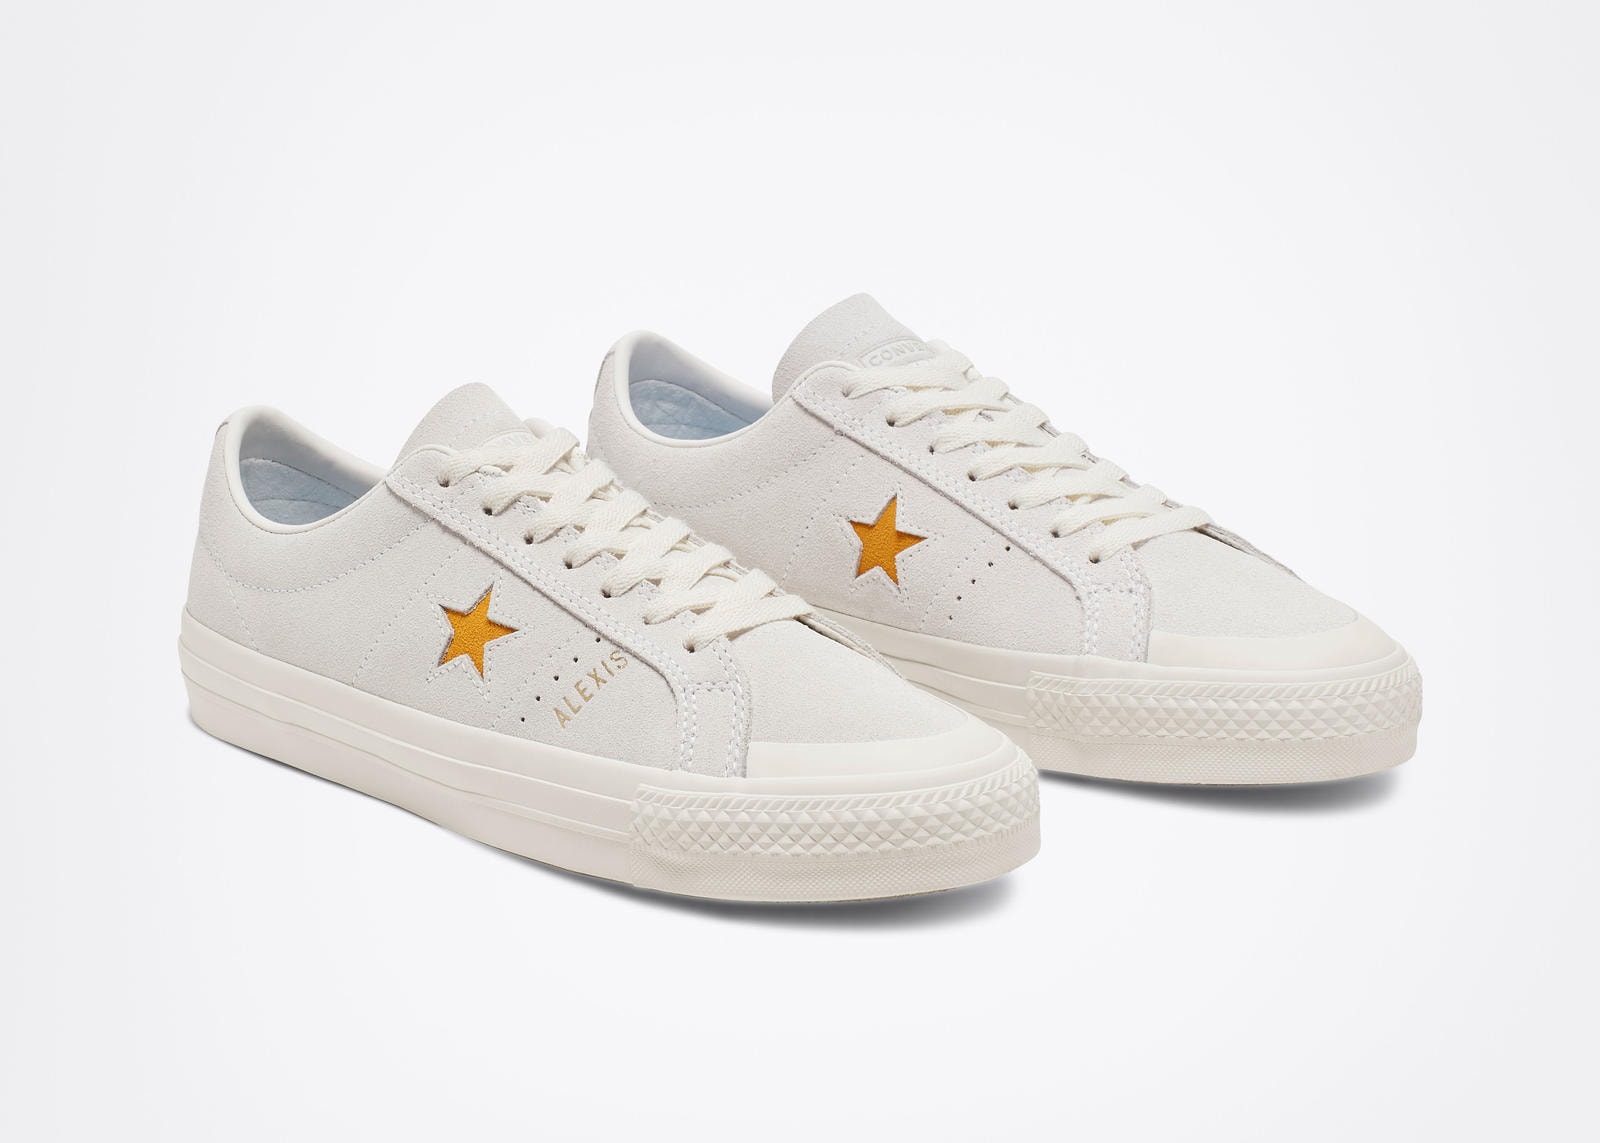 ALEXIS SABLONE'S UNISEX CONS ONE STAR PRO SHOES HAVE HER MARK ALL OVER THEM